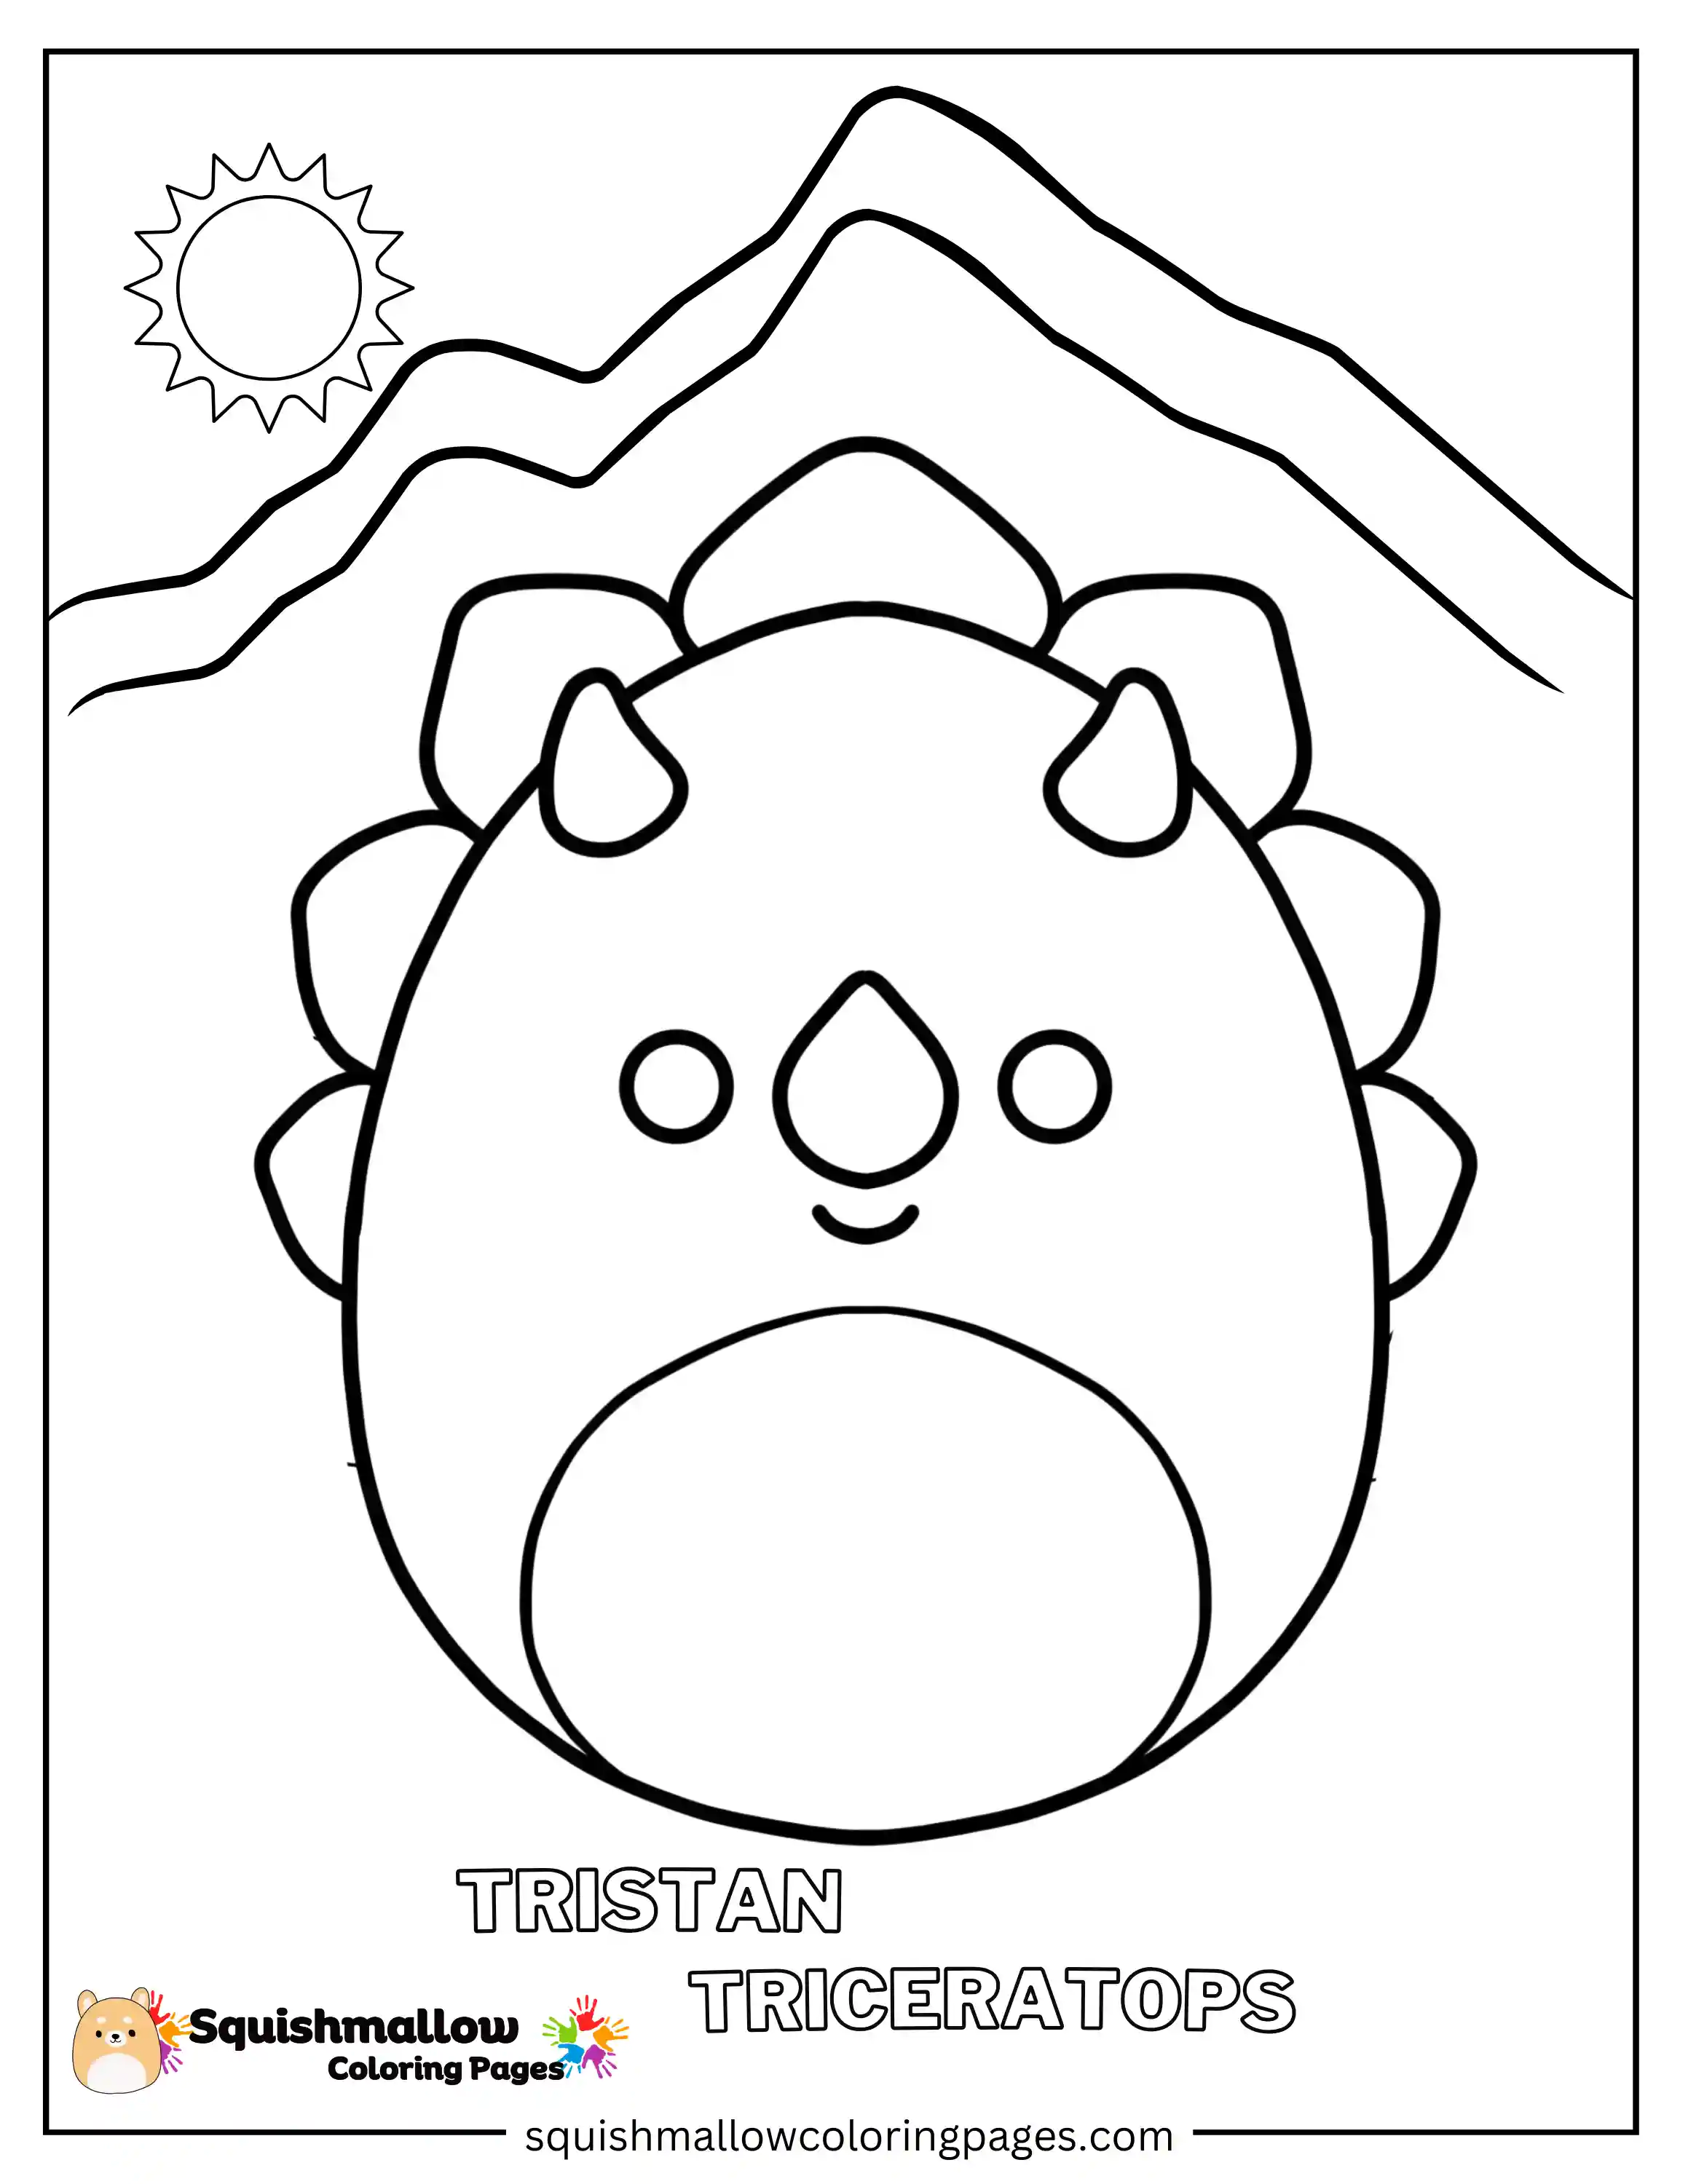 Tristan The Triceratops Squishmallow Coloring Pages